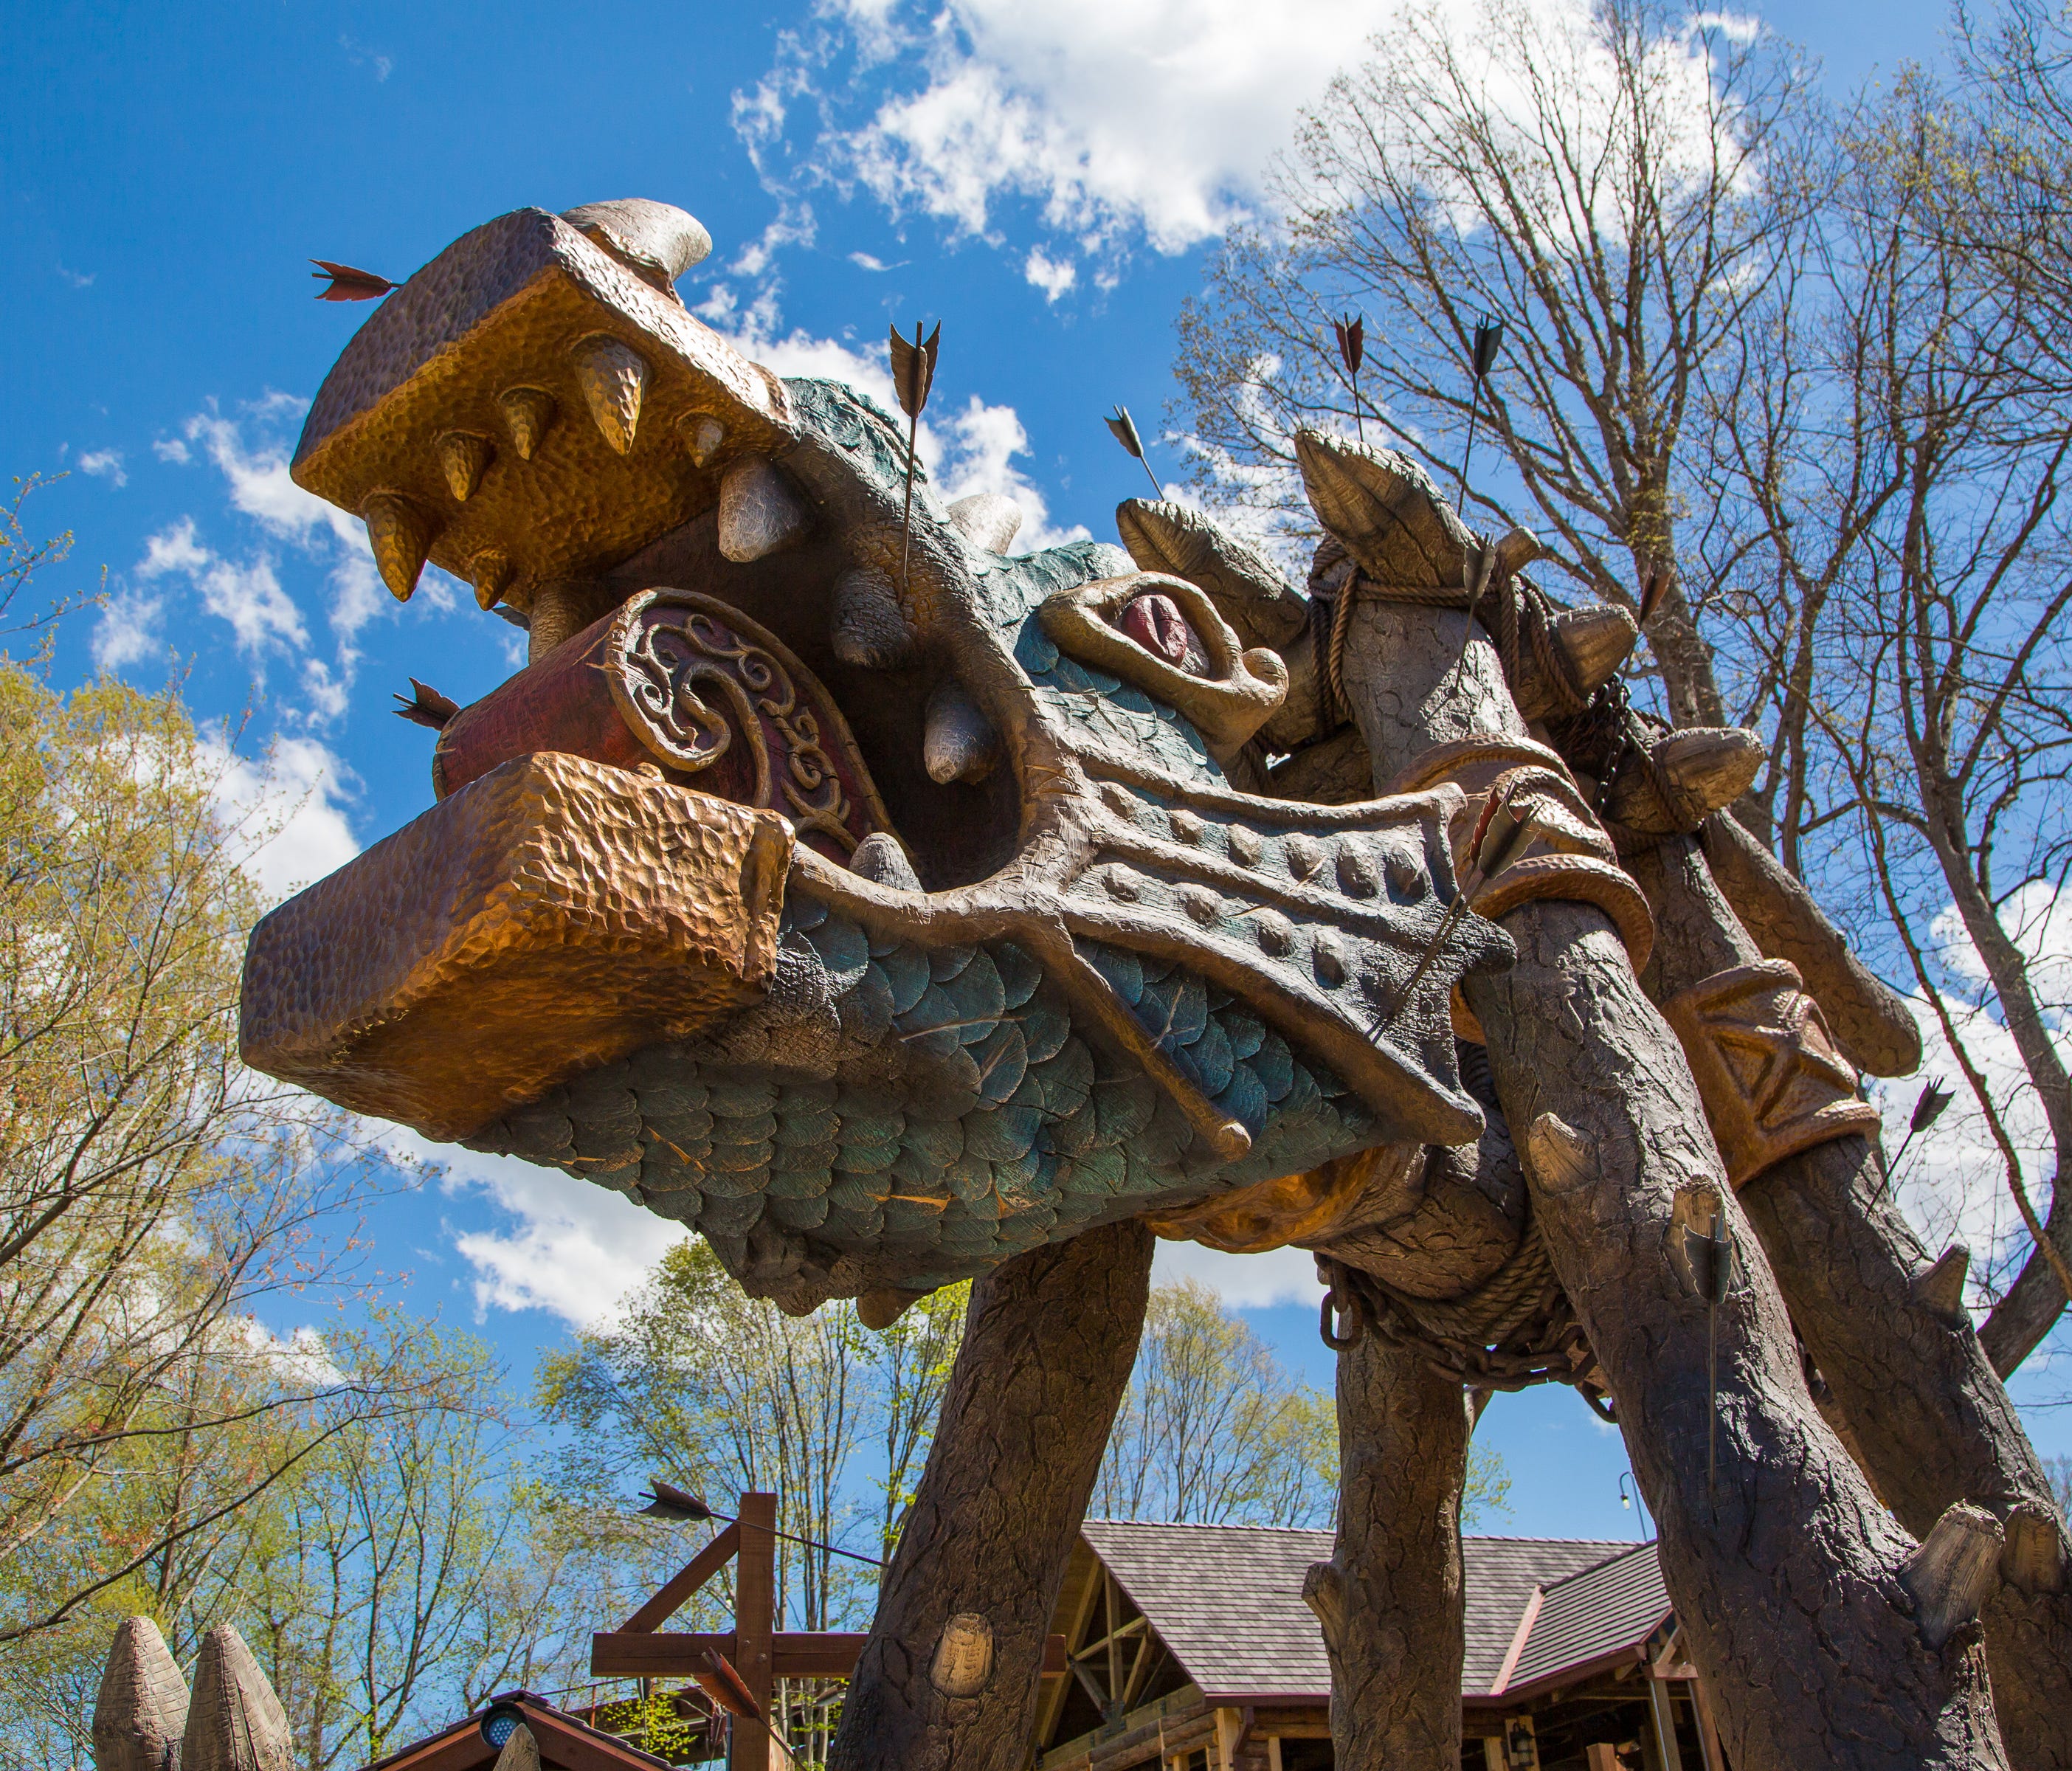 The Vikings' whimsical battering ram graces the front entrance of the coaster.